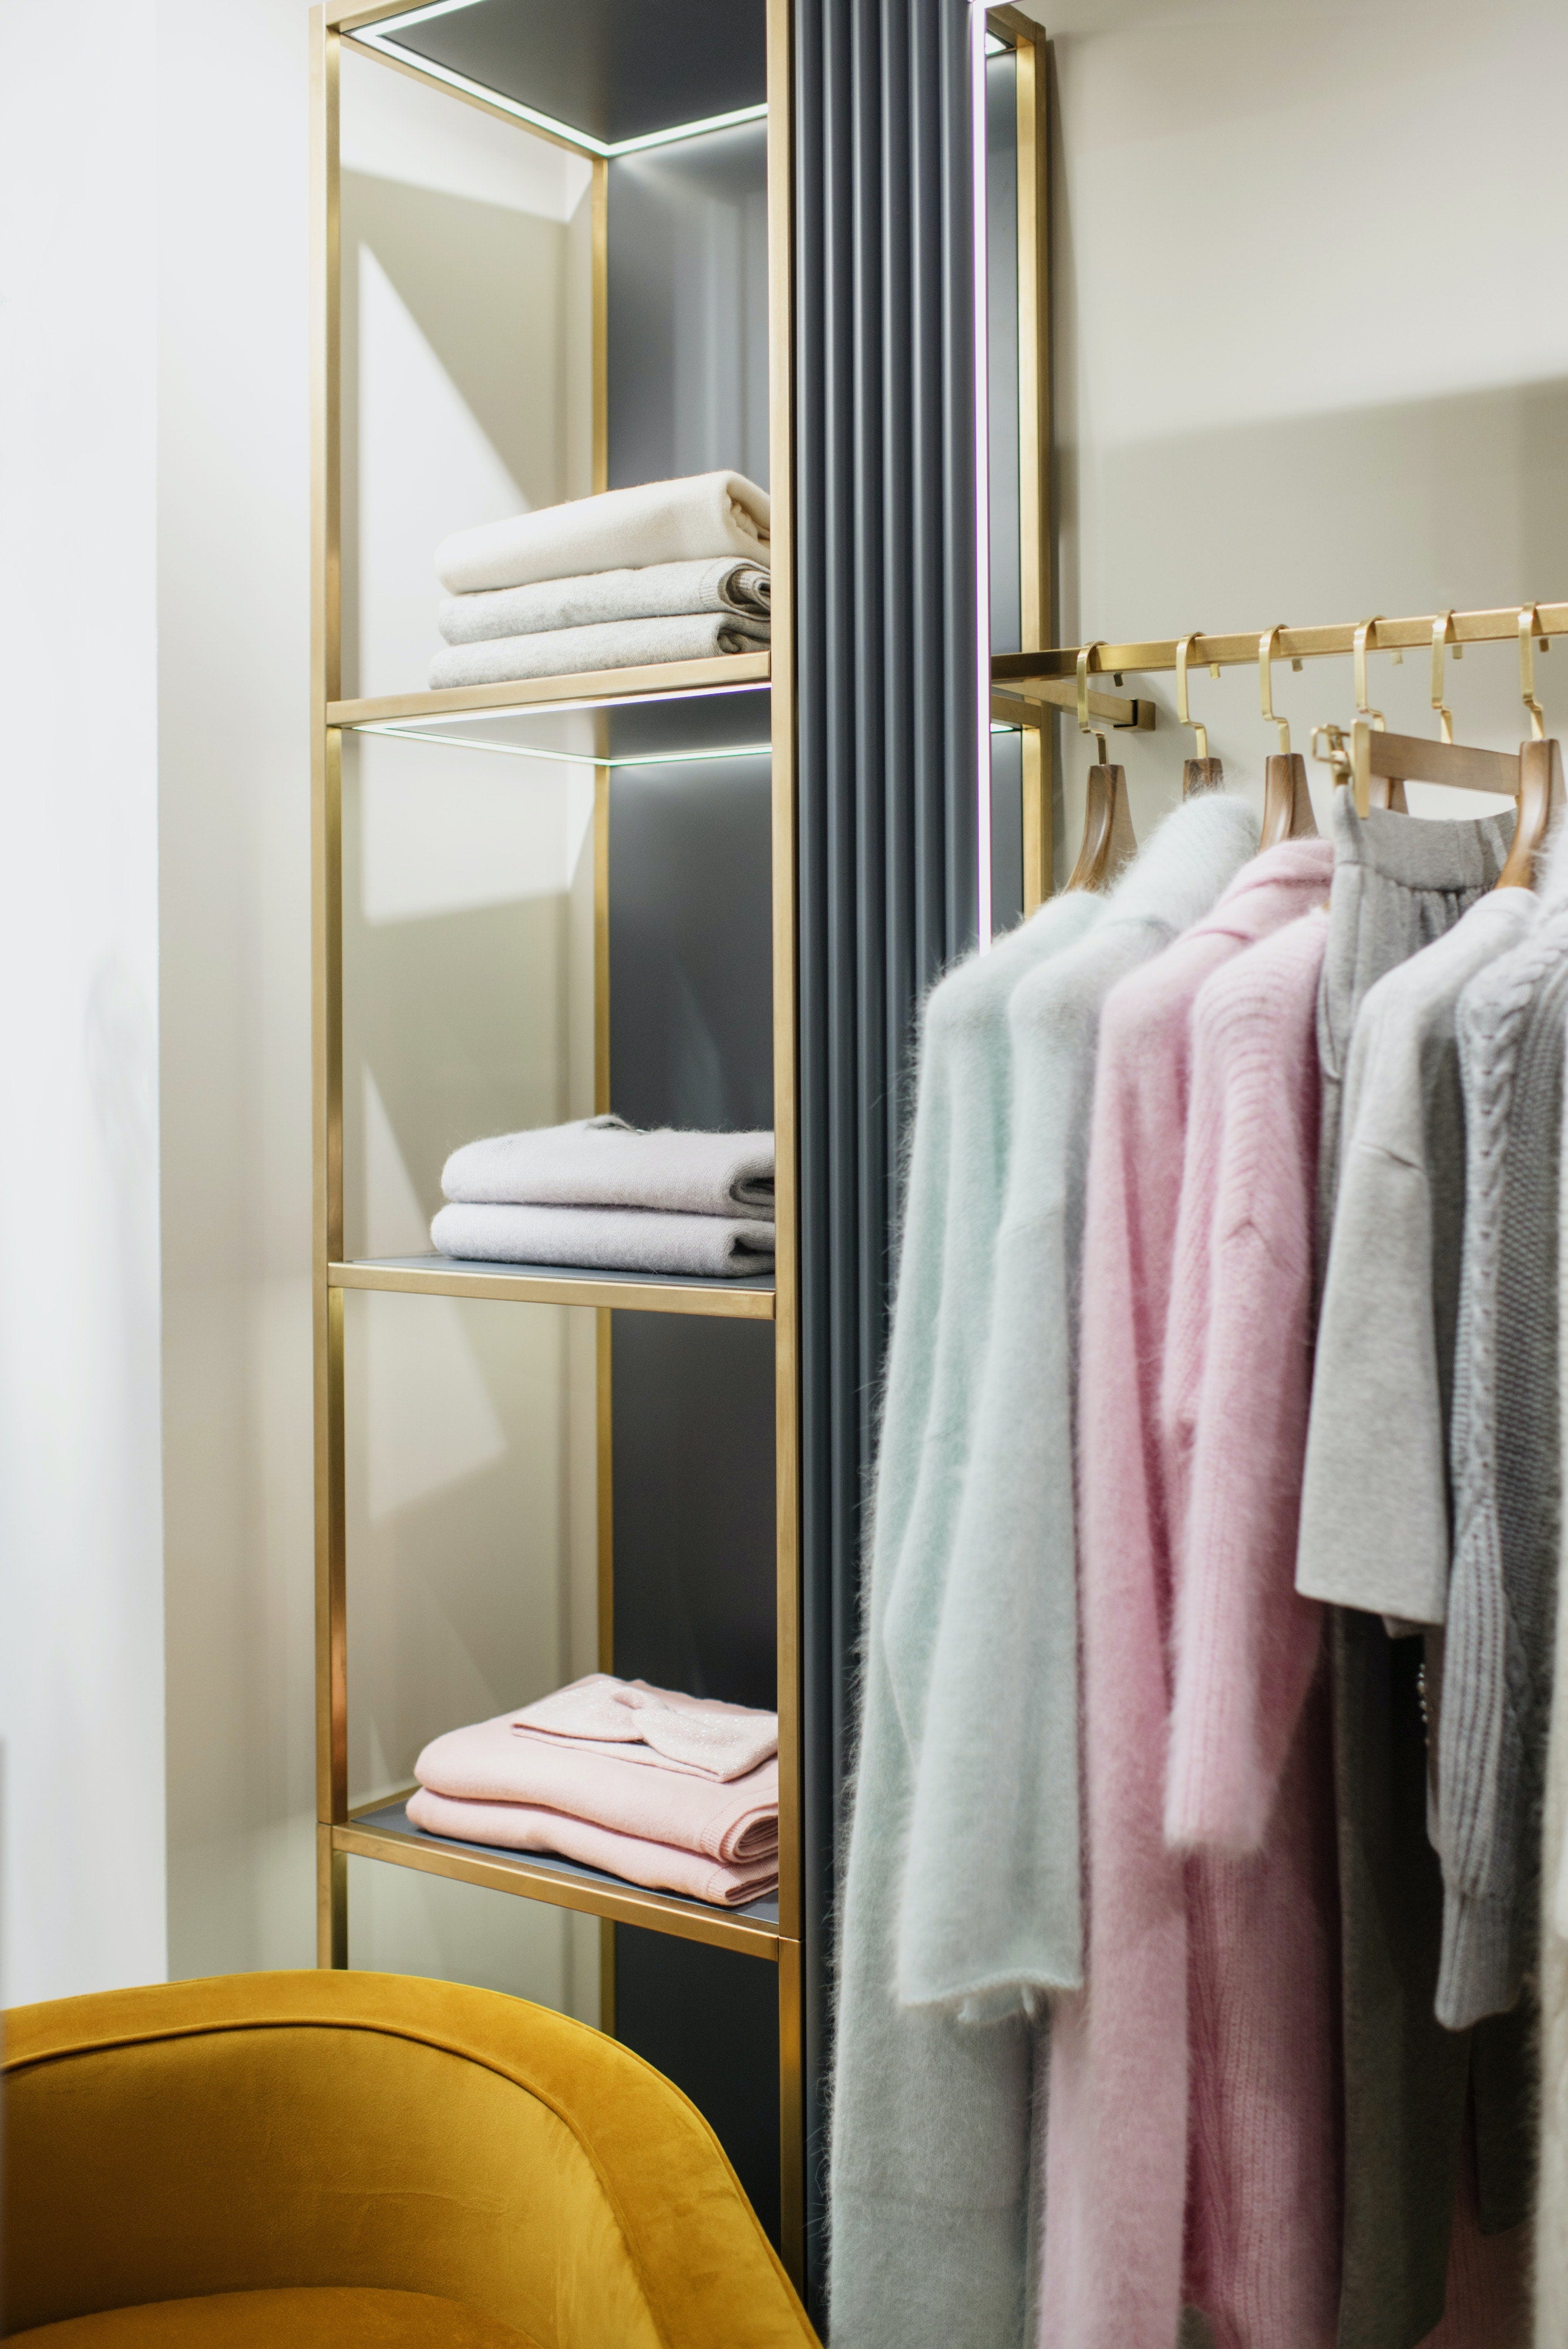 How To Organize a Closet in a Non-Permanent Way (No Drilling and